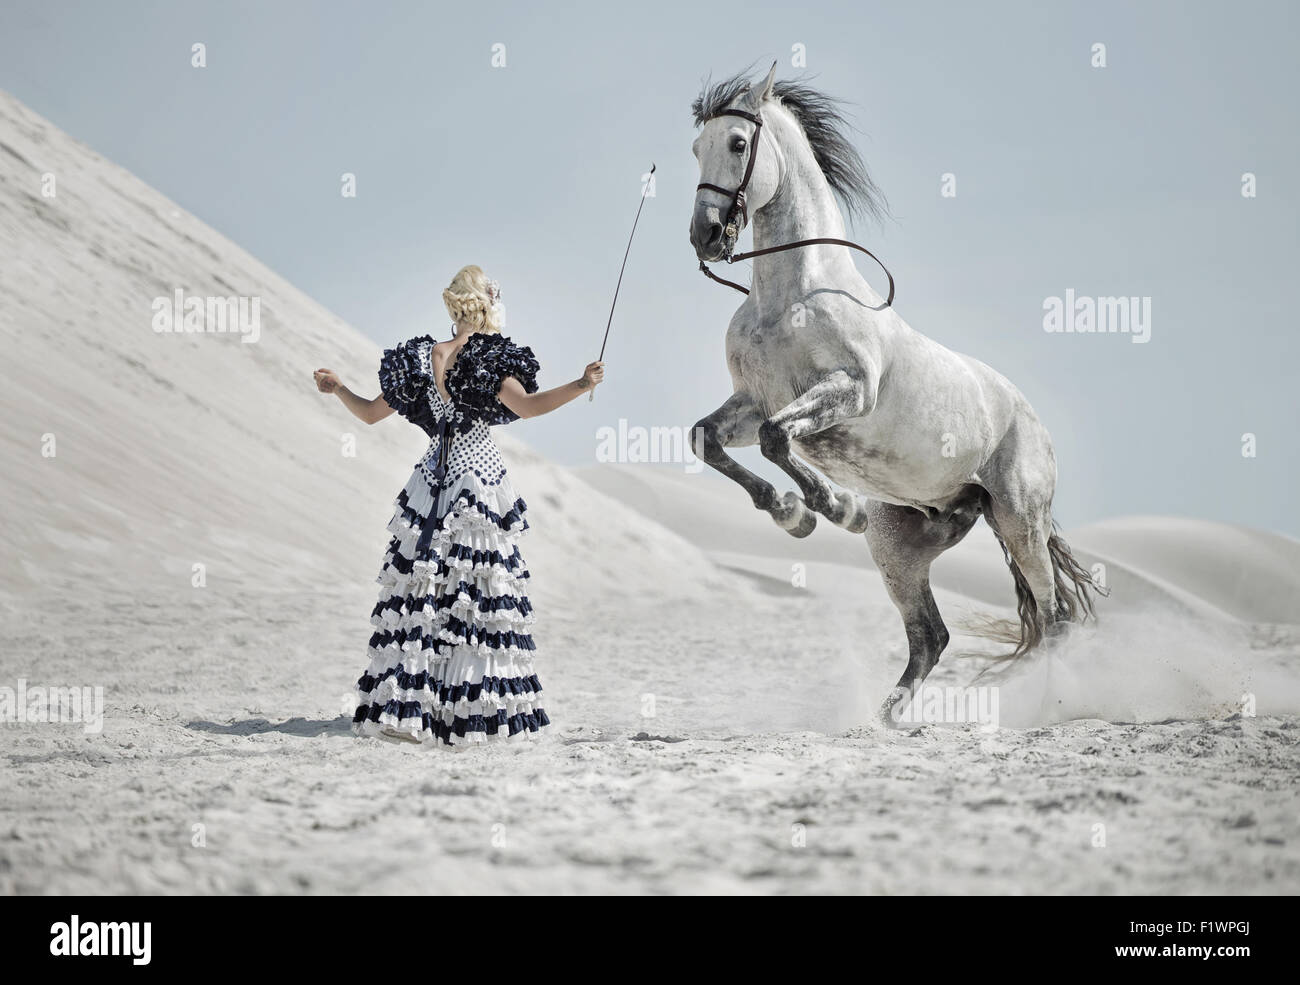 Alluring blonde training the horse Stock Photo